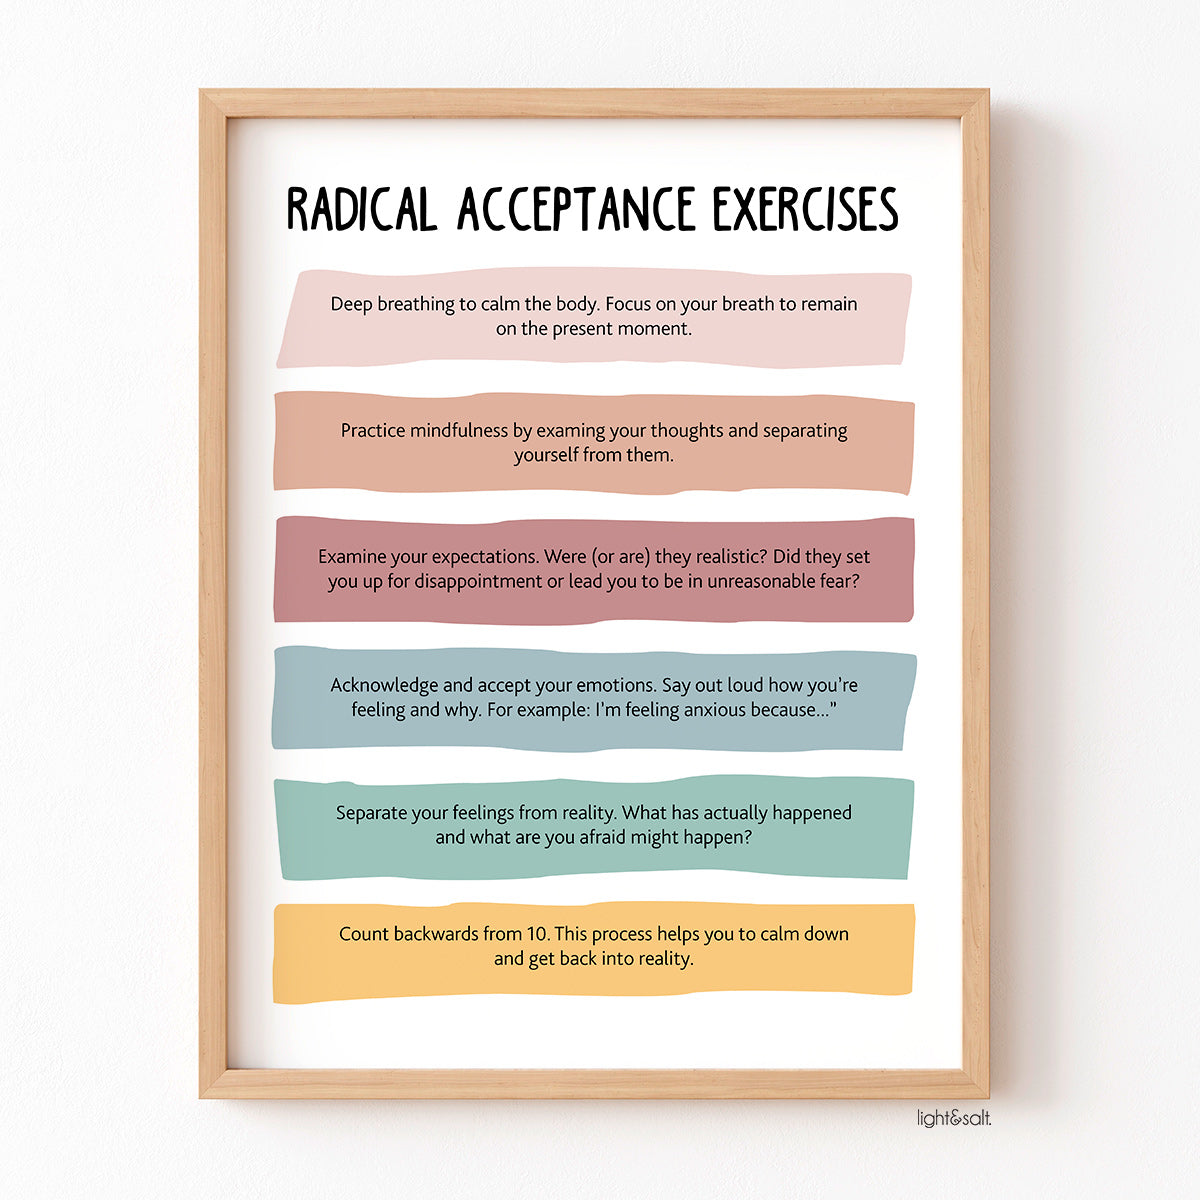 Radical acceptance exercises poster